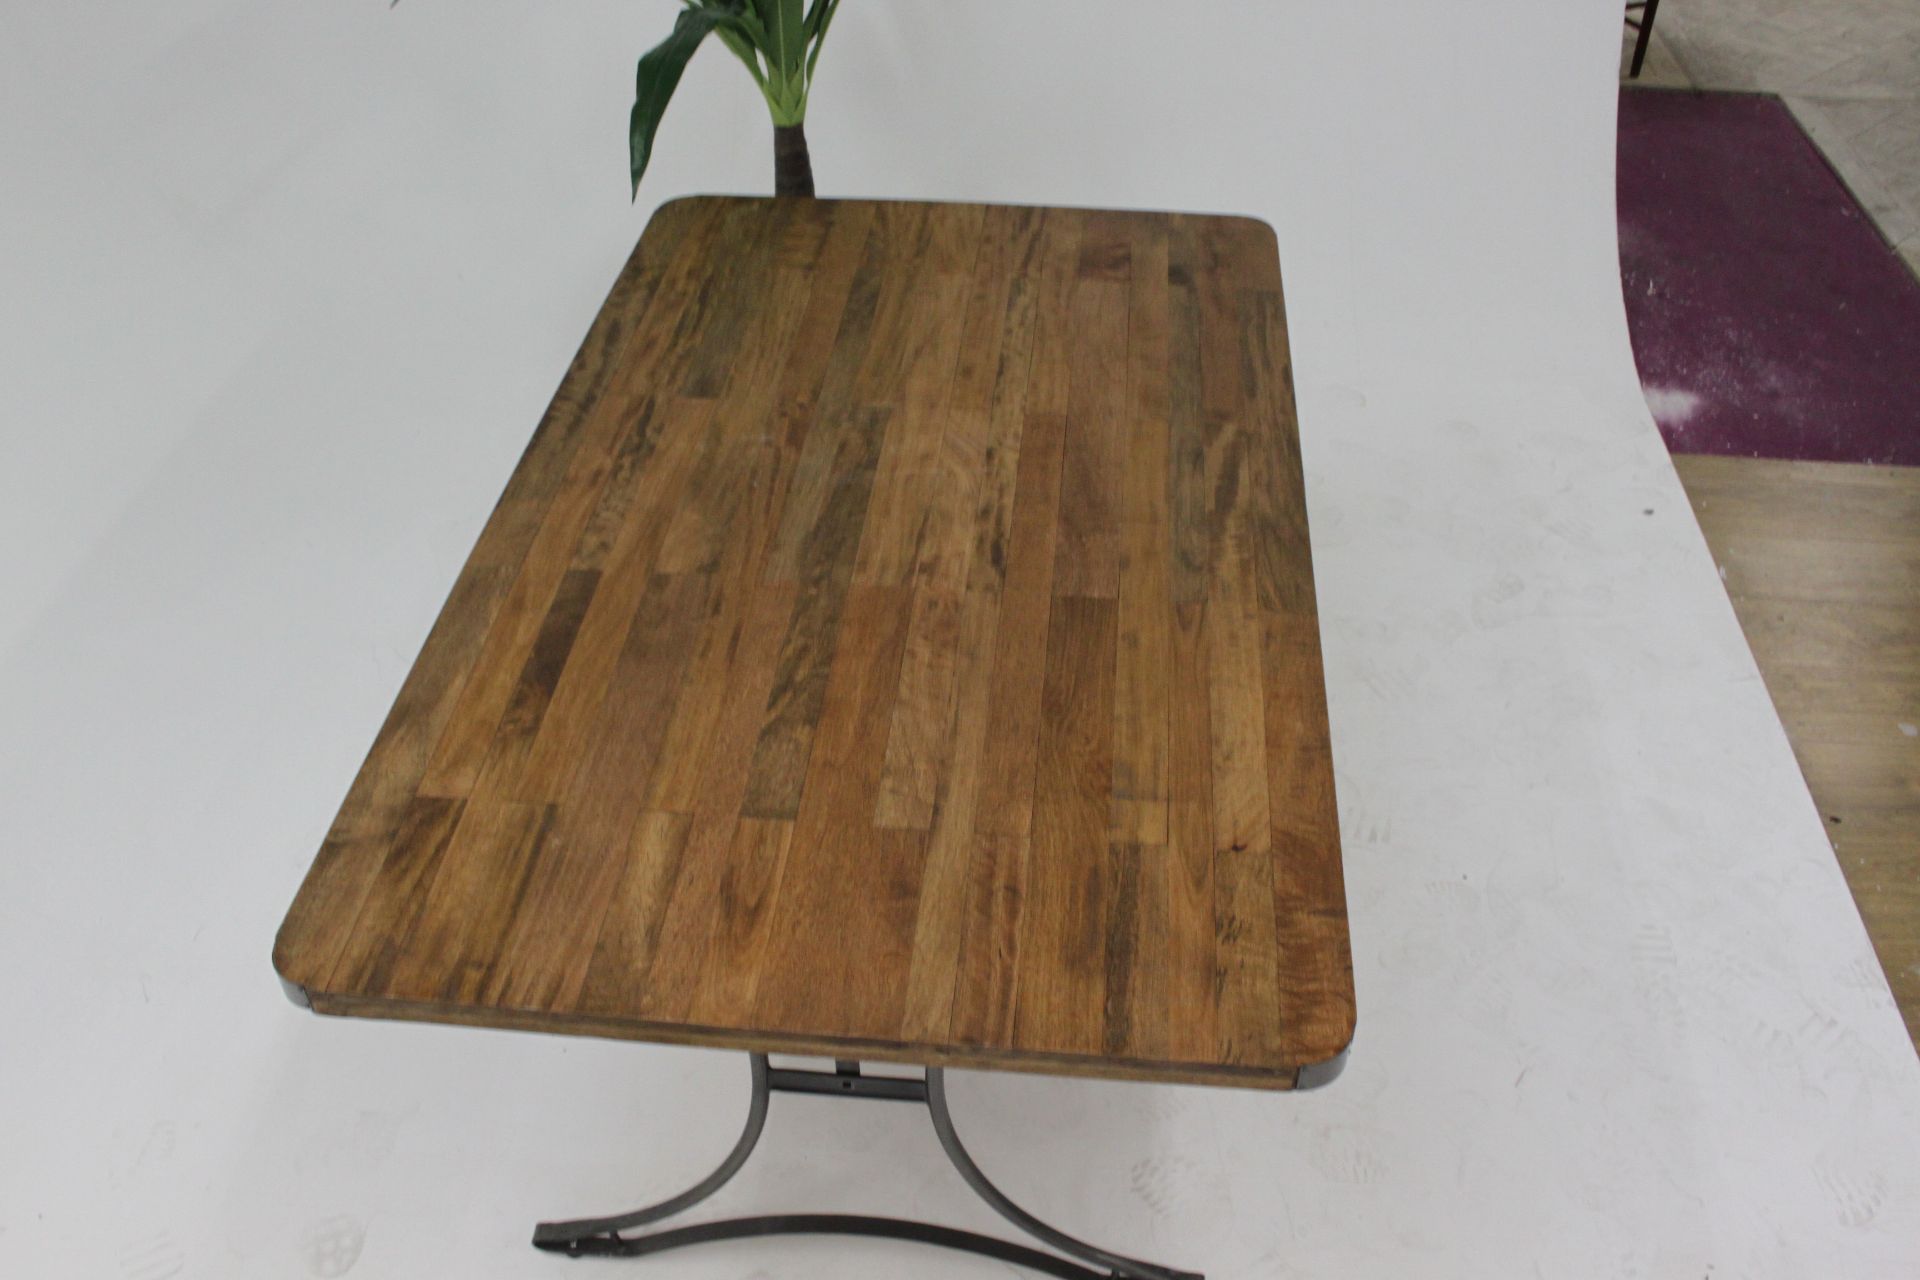 Re-Engineered Rectangular Table A Stunning 5ft Solid Mango Wood Dining Table With A Solid Steel